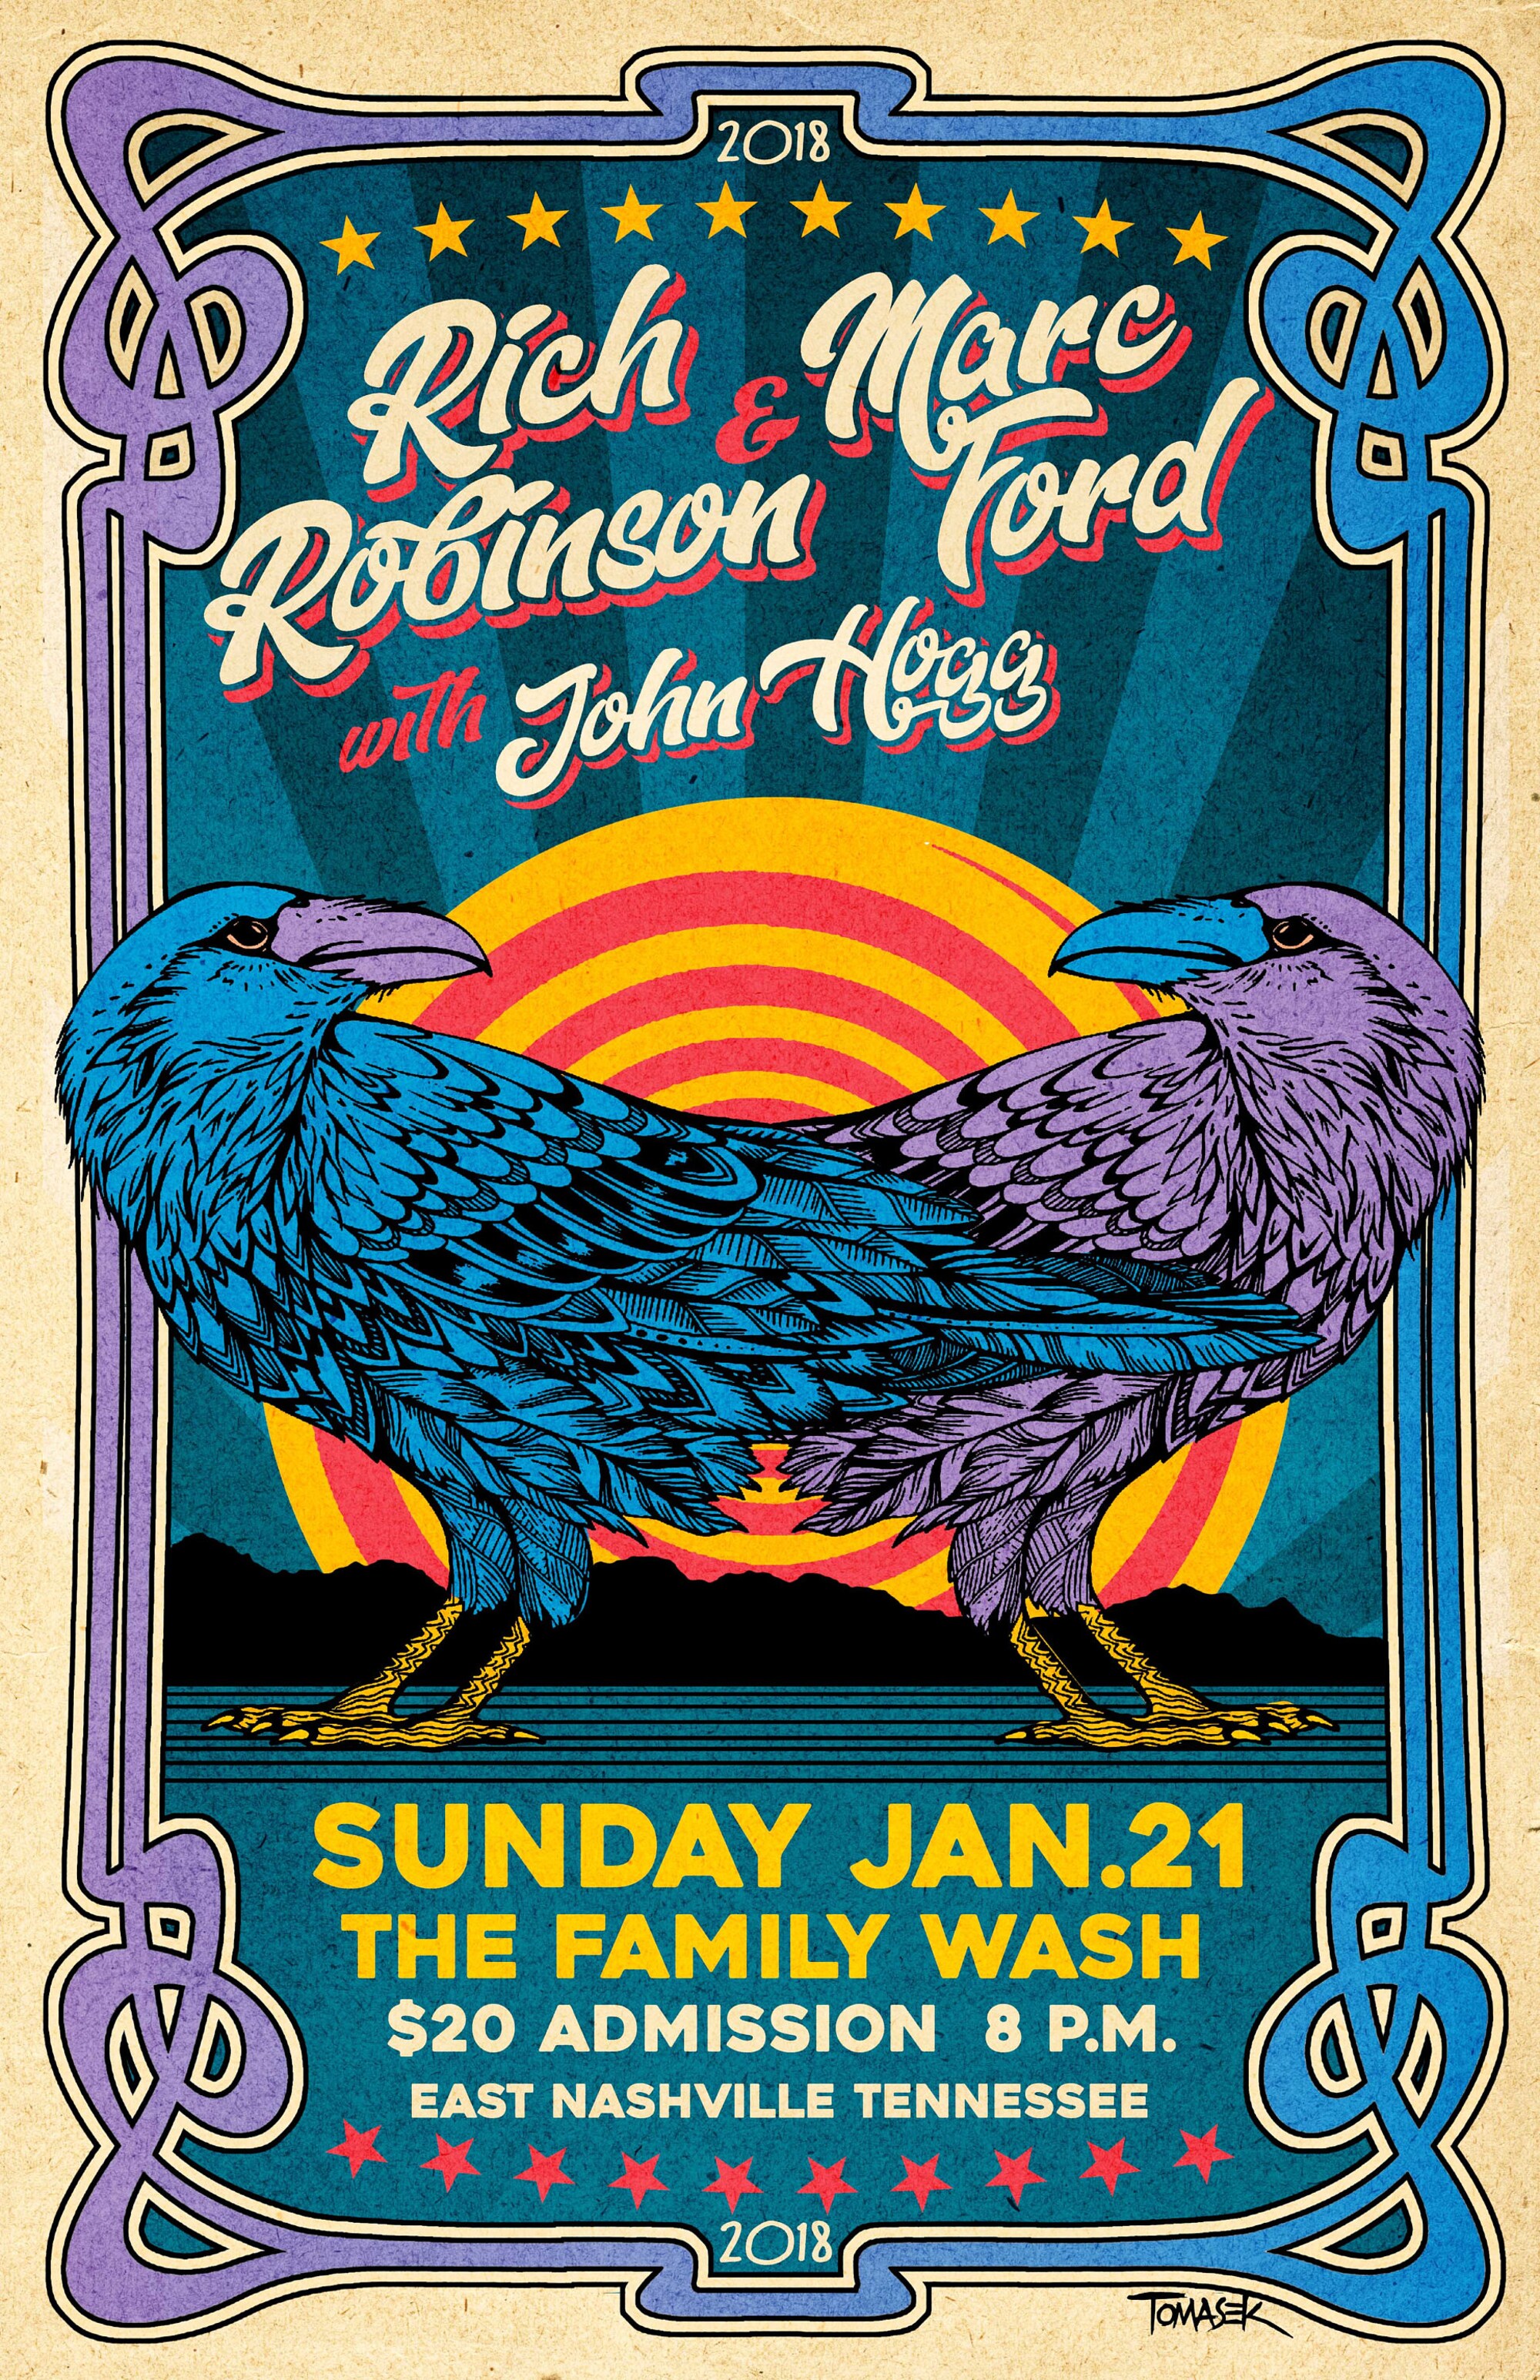 Rich Robinson/ Marc Ford Concert Poster